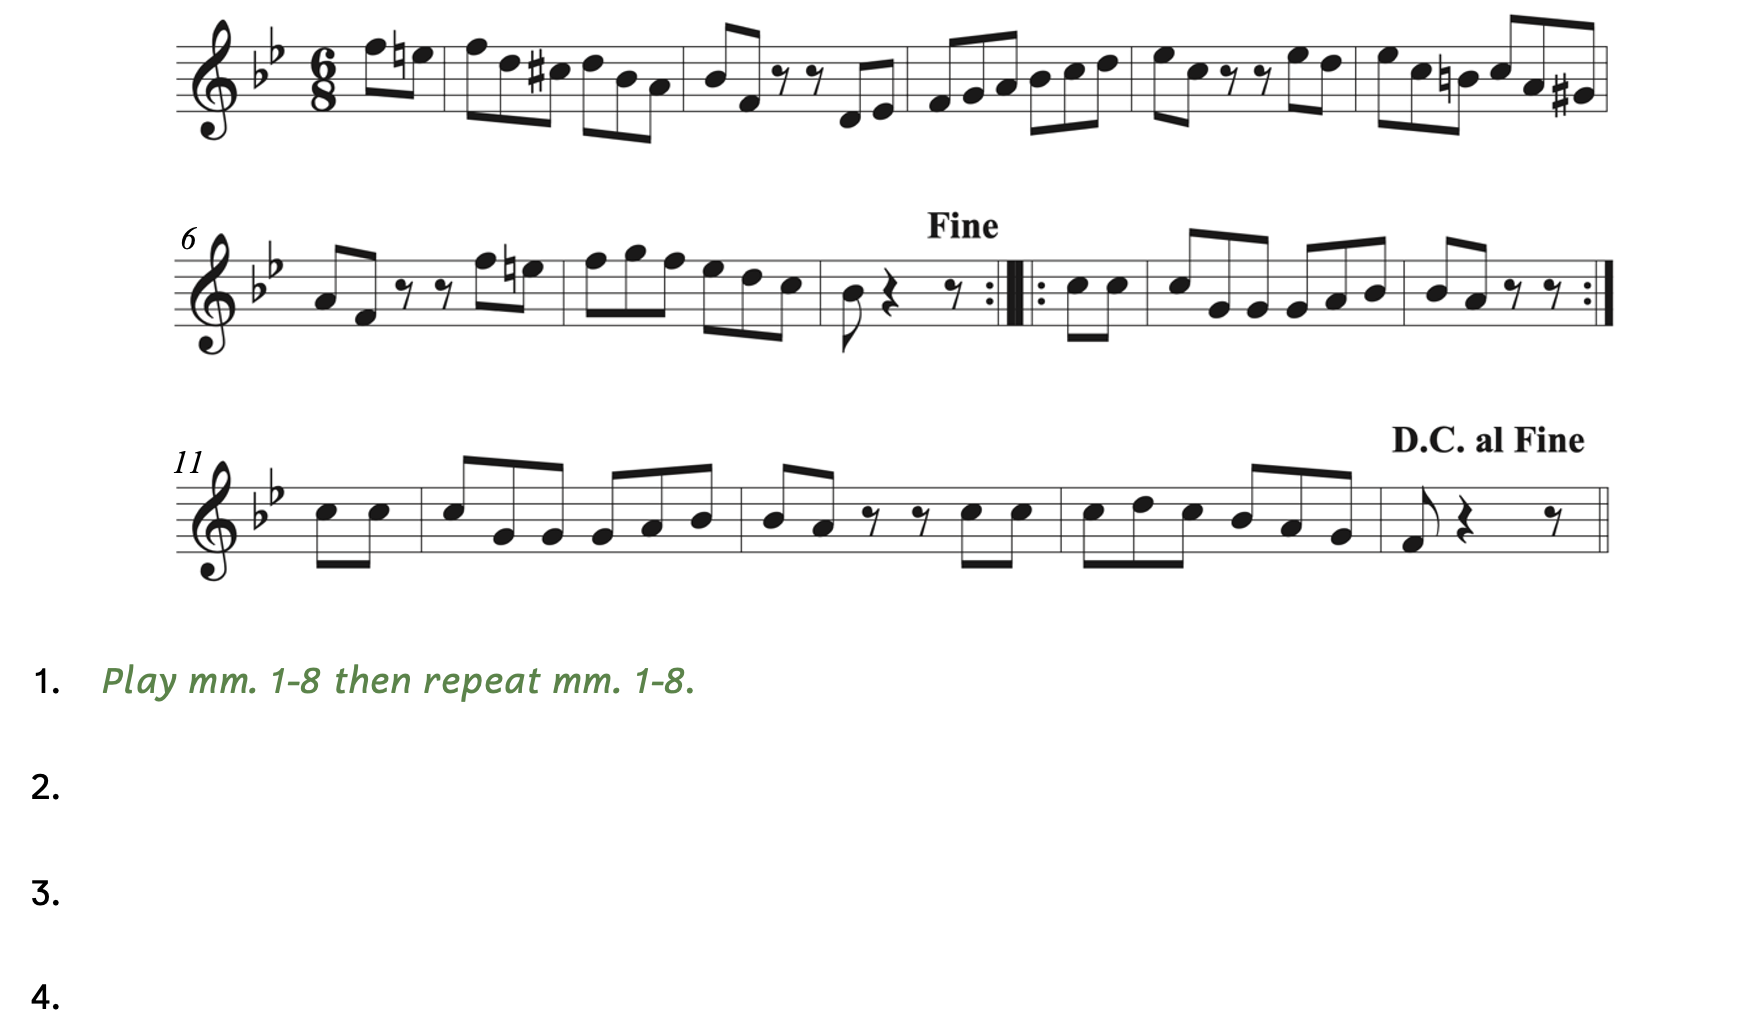 There is an end-repeat sign in measure 8. On the other side of the end-repeat sign is a start-repeat sign. There is another end-repeat sign at measure 10. The music ends with D.C. al Feenay. Feenay appears in the middle of measure 8. The sample shows that the first steps is to play measure 1 through 8 then repeat measures 1 through 8.